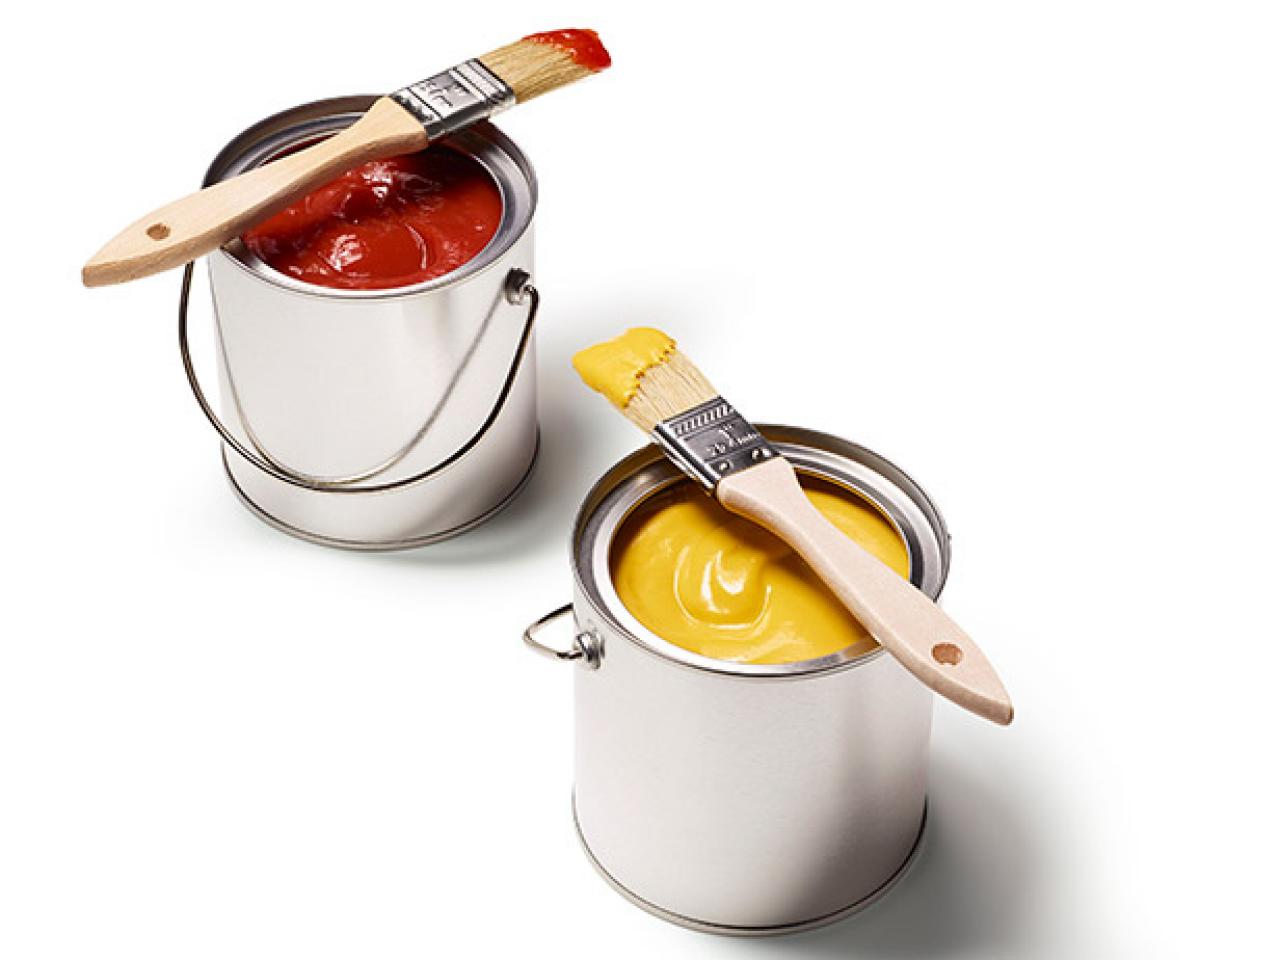 Fun Cooking A Creative Way To Serve Condiments  Fn Dish -7948